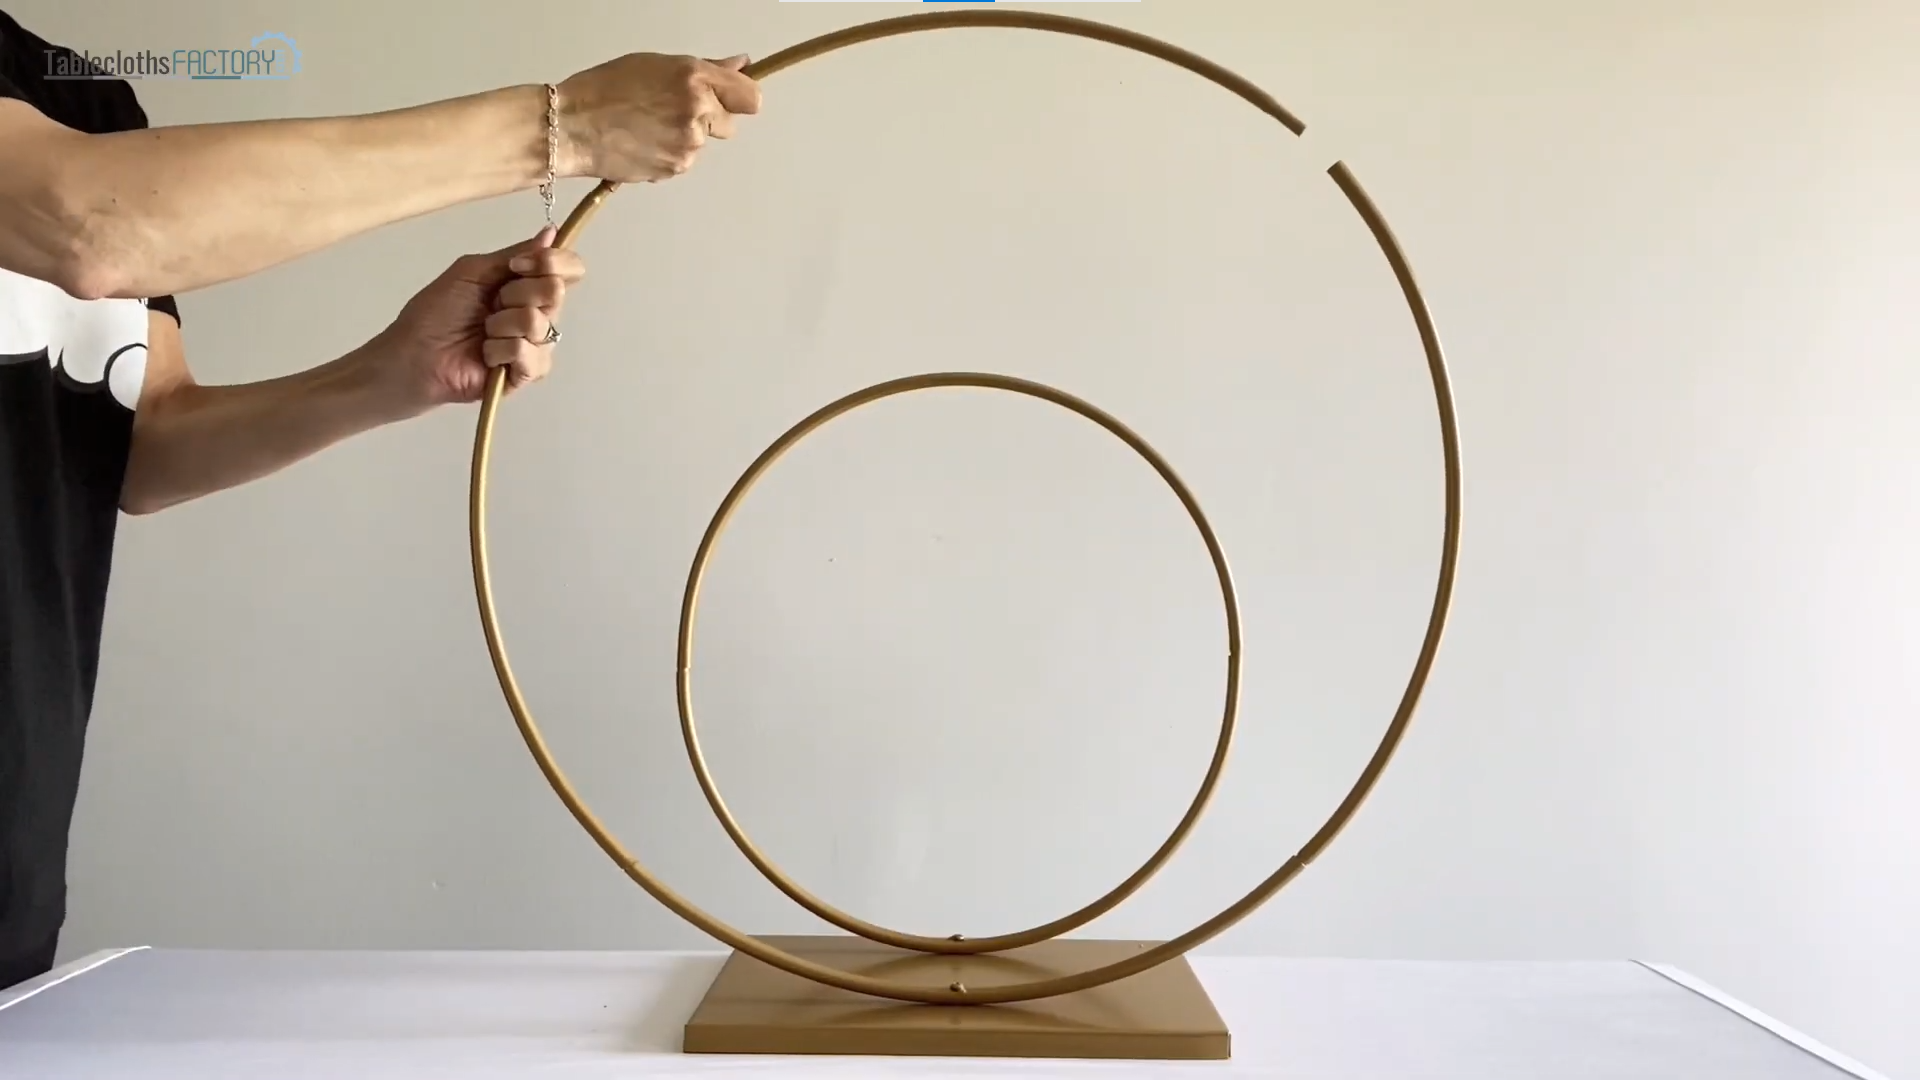 Person assembling a double hoop metal stand